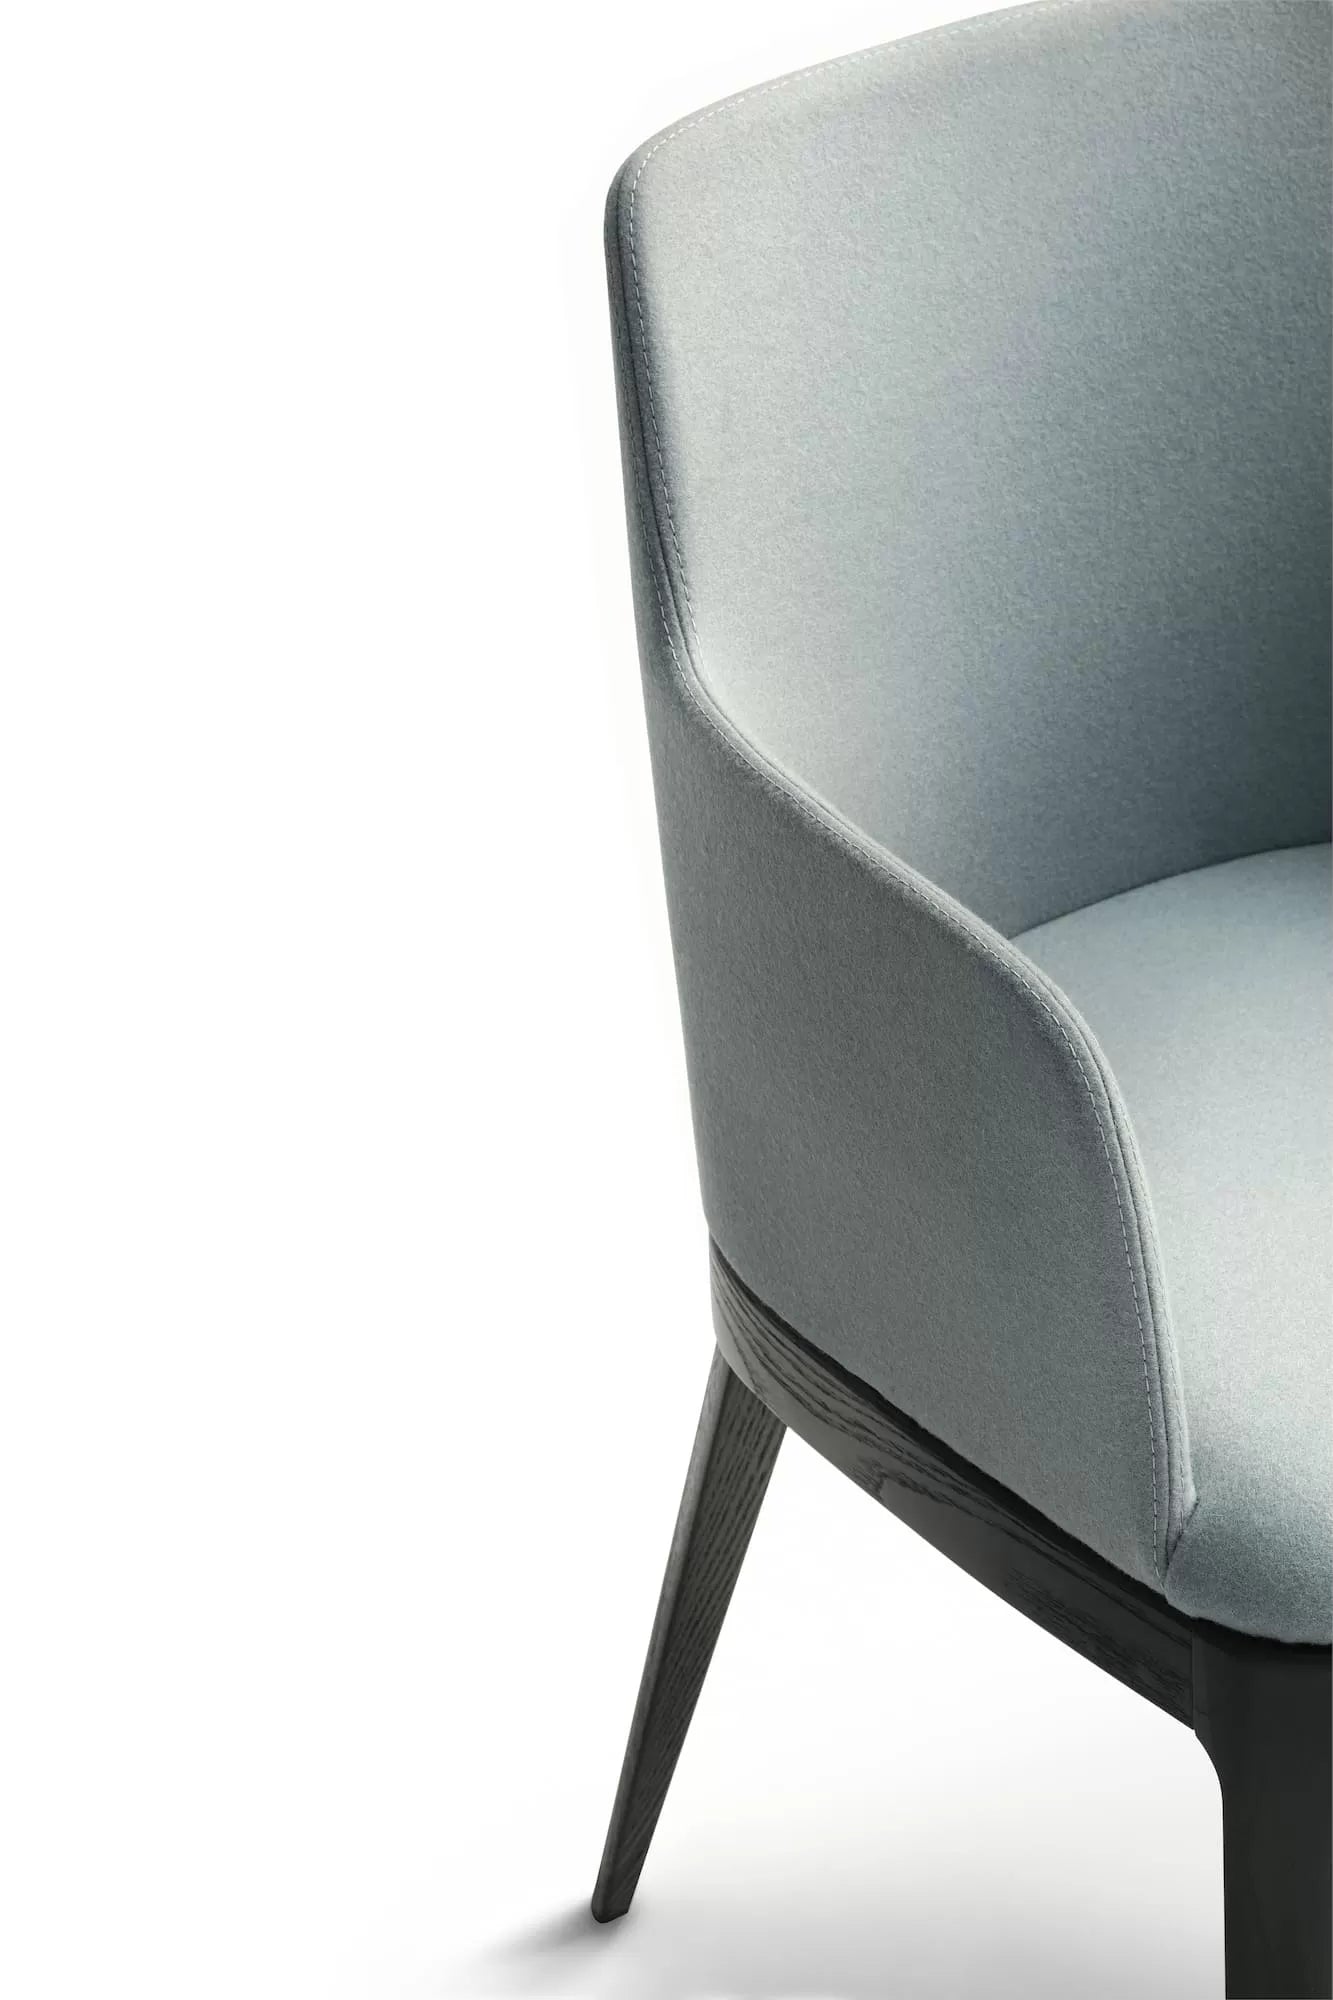 Bontempi Margot Dining Chair With Arms And Wood Legs